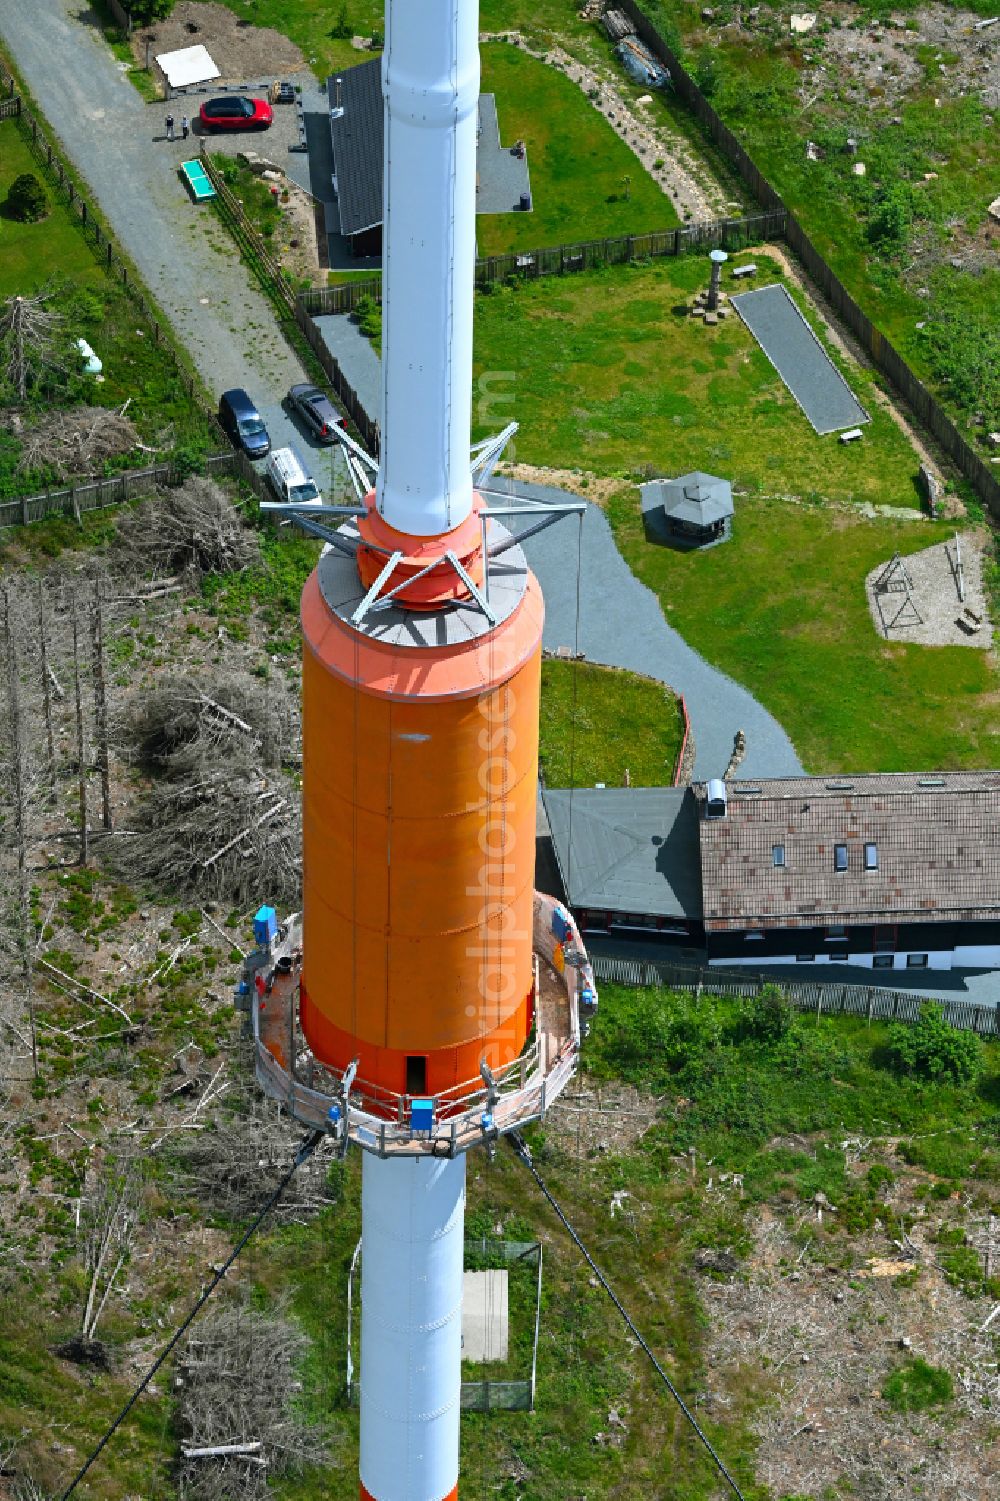 Torfhaus from above - Steel mast funkturm and transmission system as basic network transmitter of NDR Norddeutscher Rundfunk in Torfhaus in the state Lower Saxony, Germany